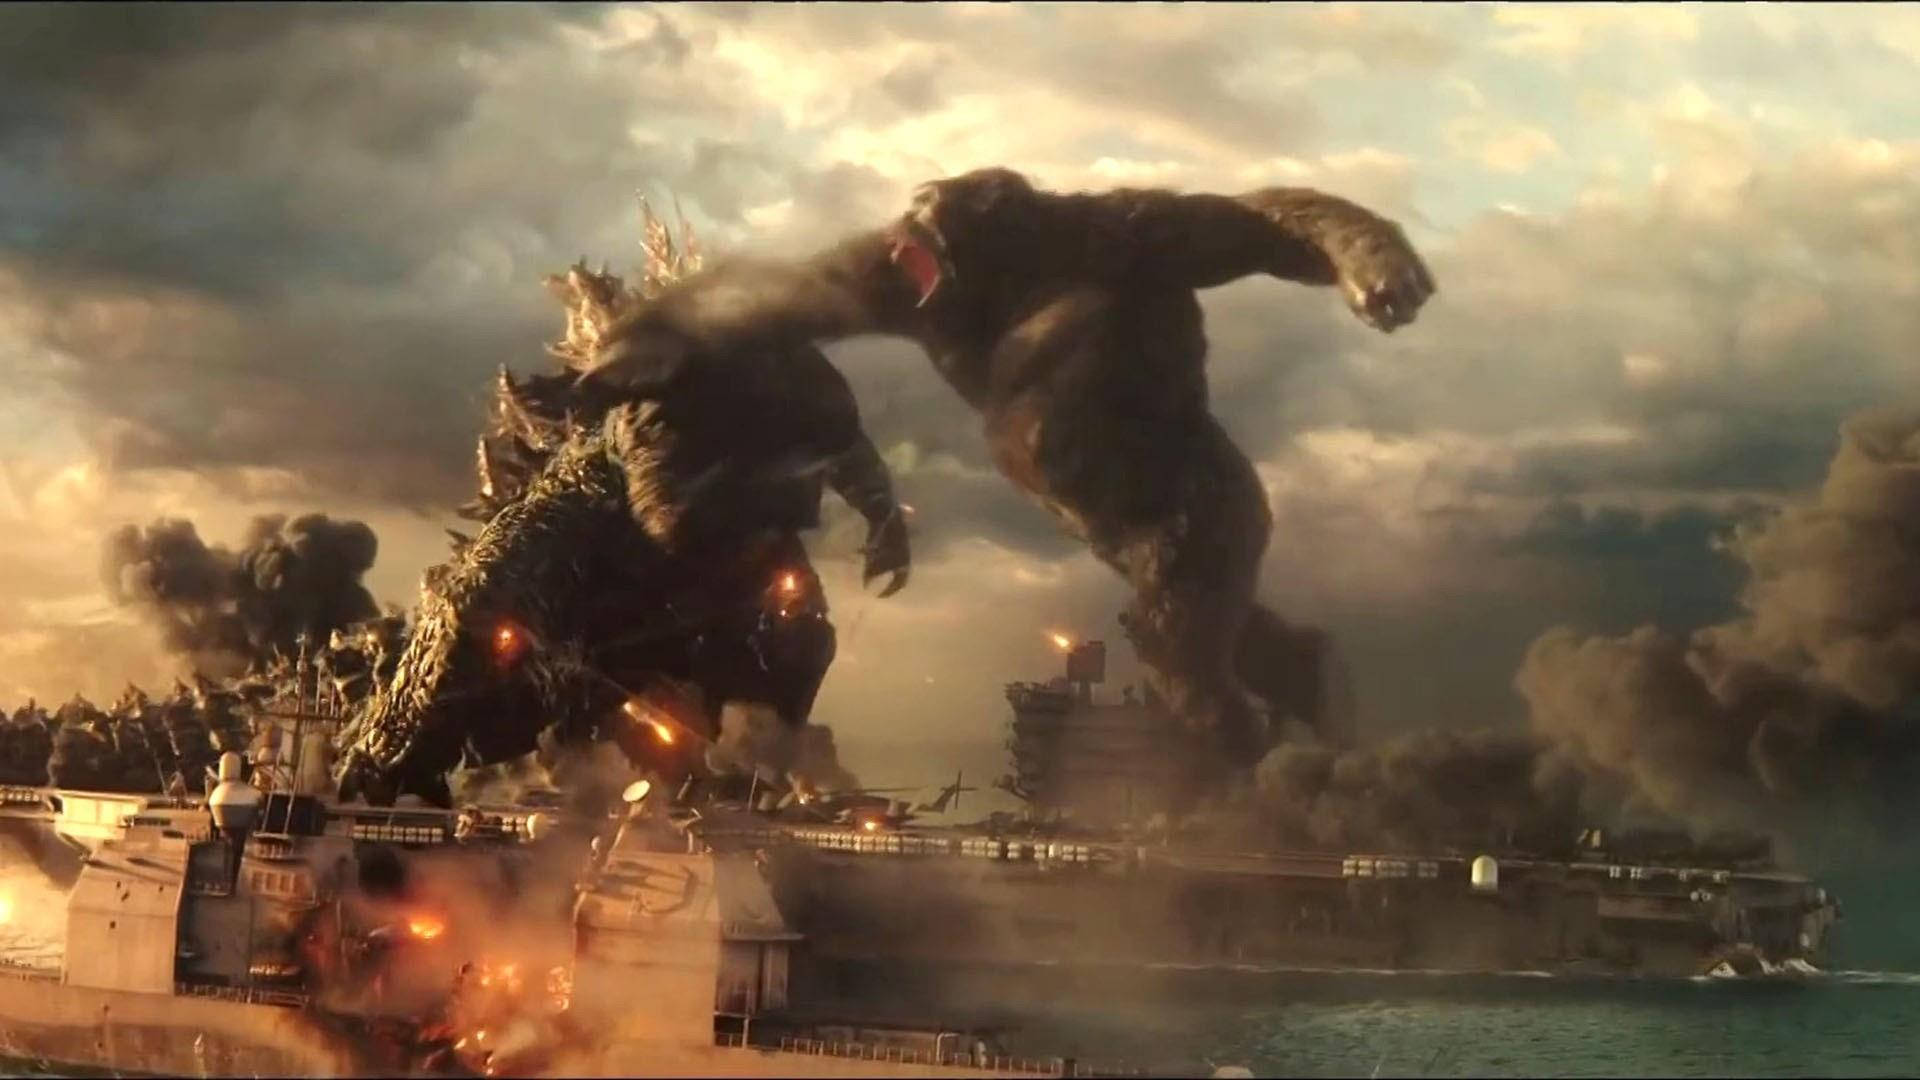 Godzilla Vs Kong: Giant Monsters Fight For Supremacy Background